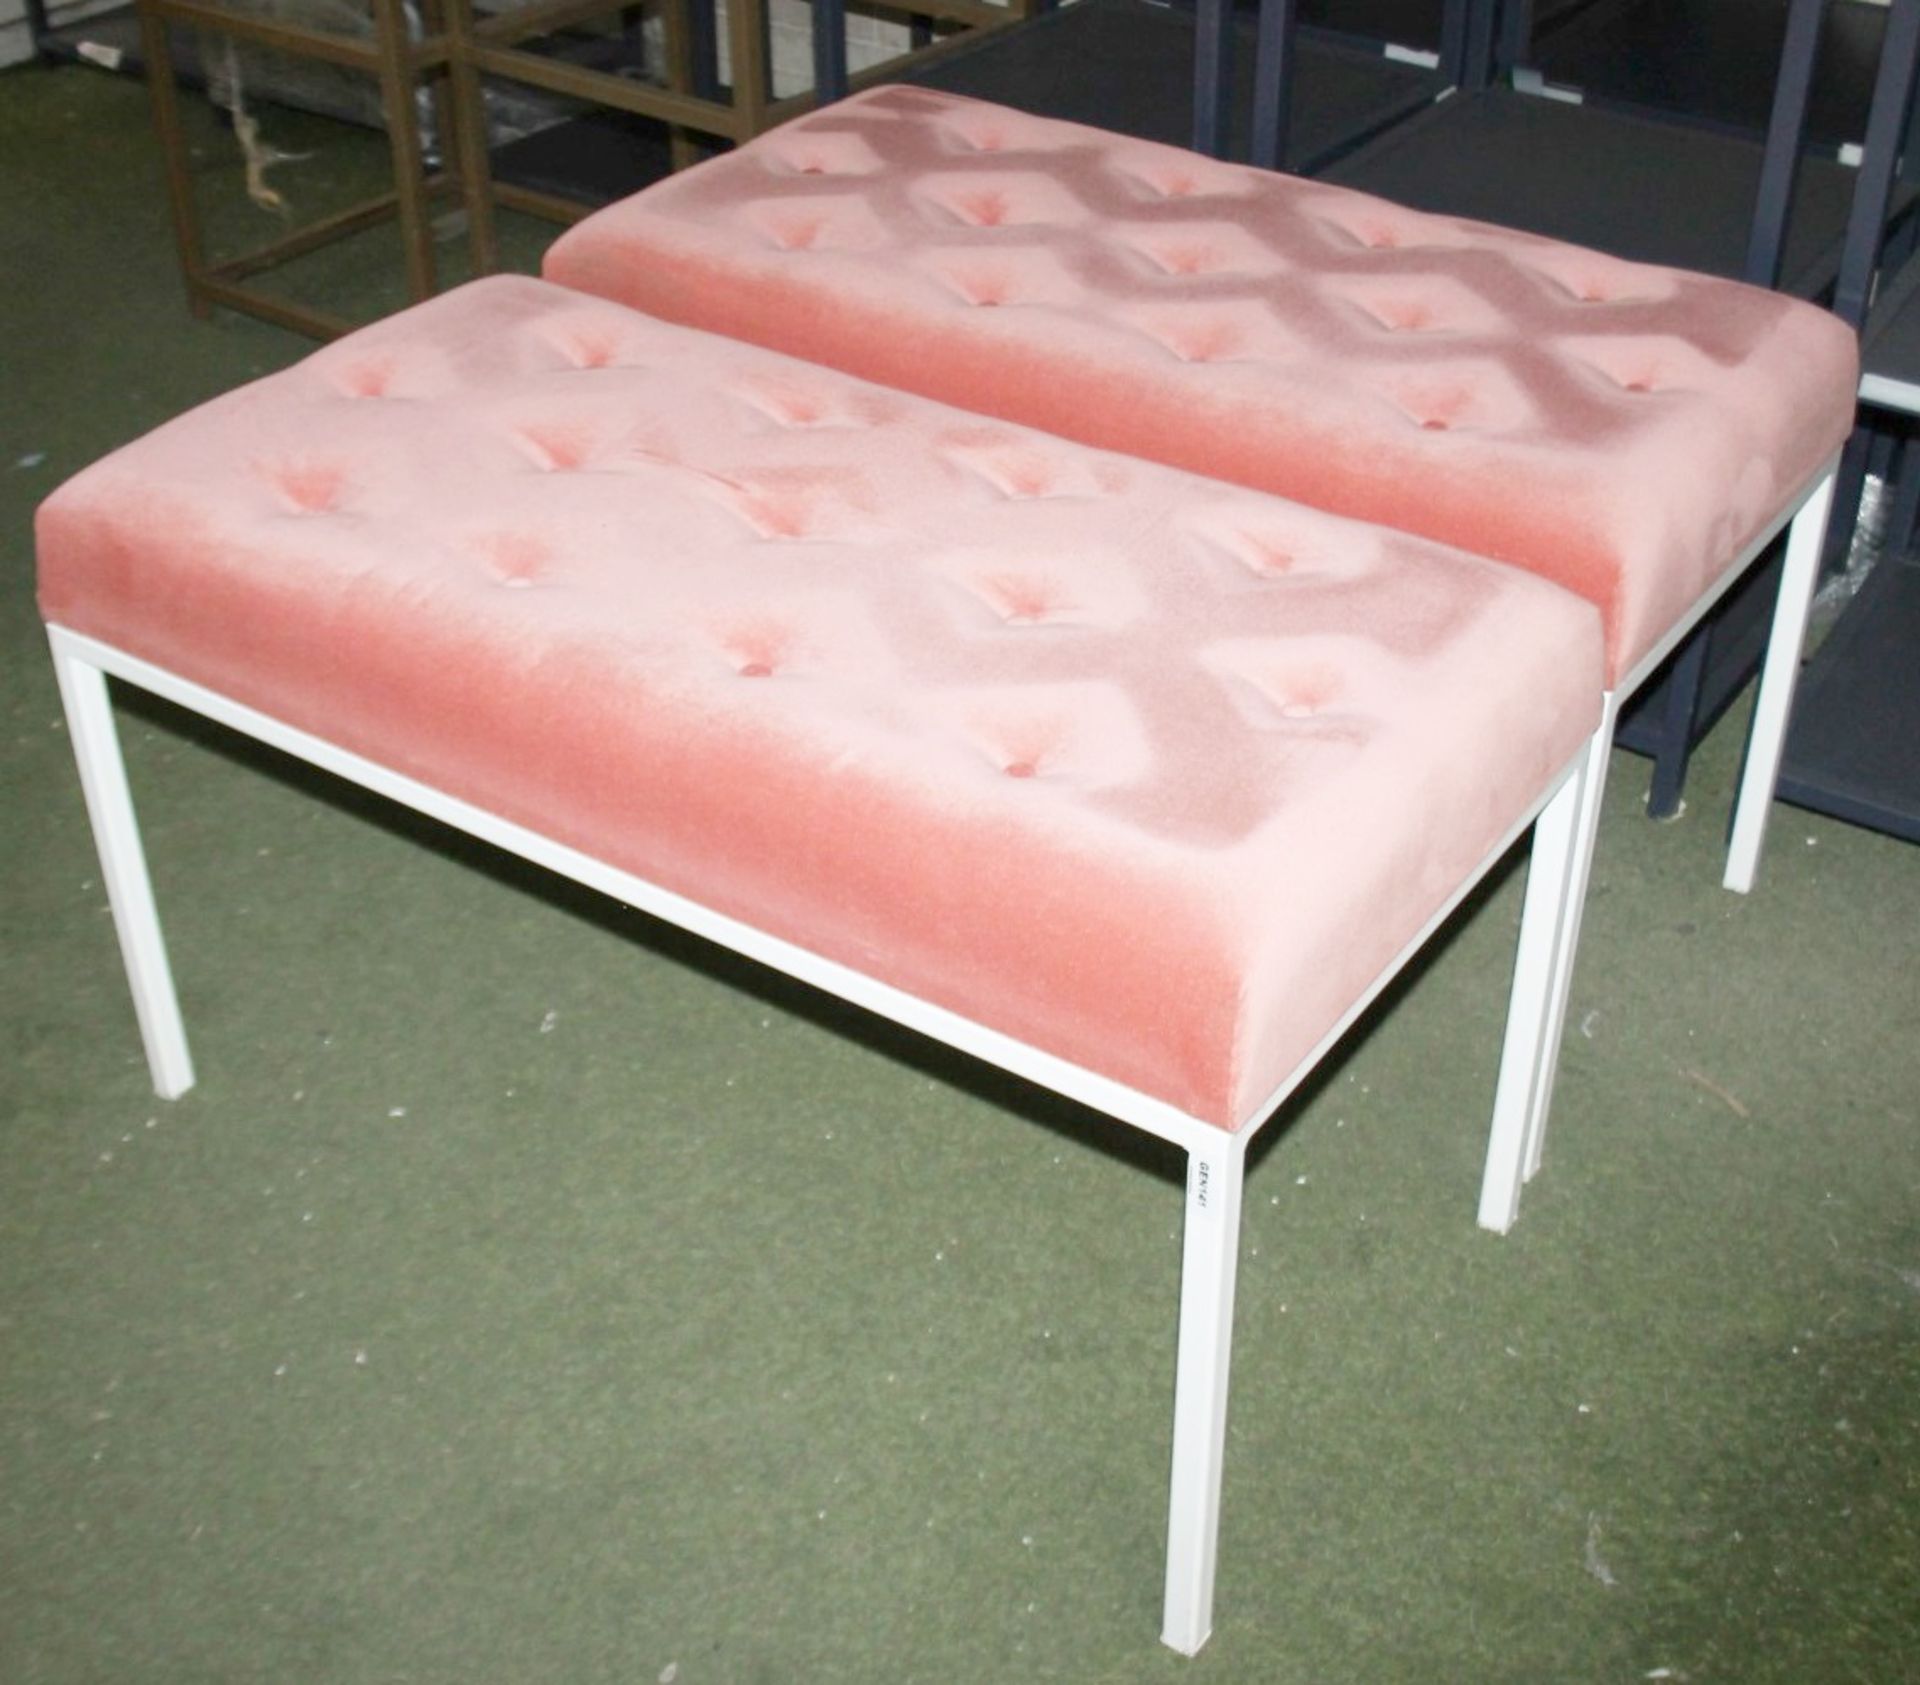 2 x Upholstered Button-Top Upholstered Showroom Stools In White And Pink - Ex-Display - £5 Start, No